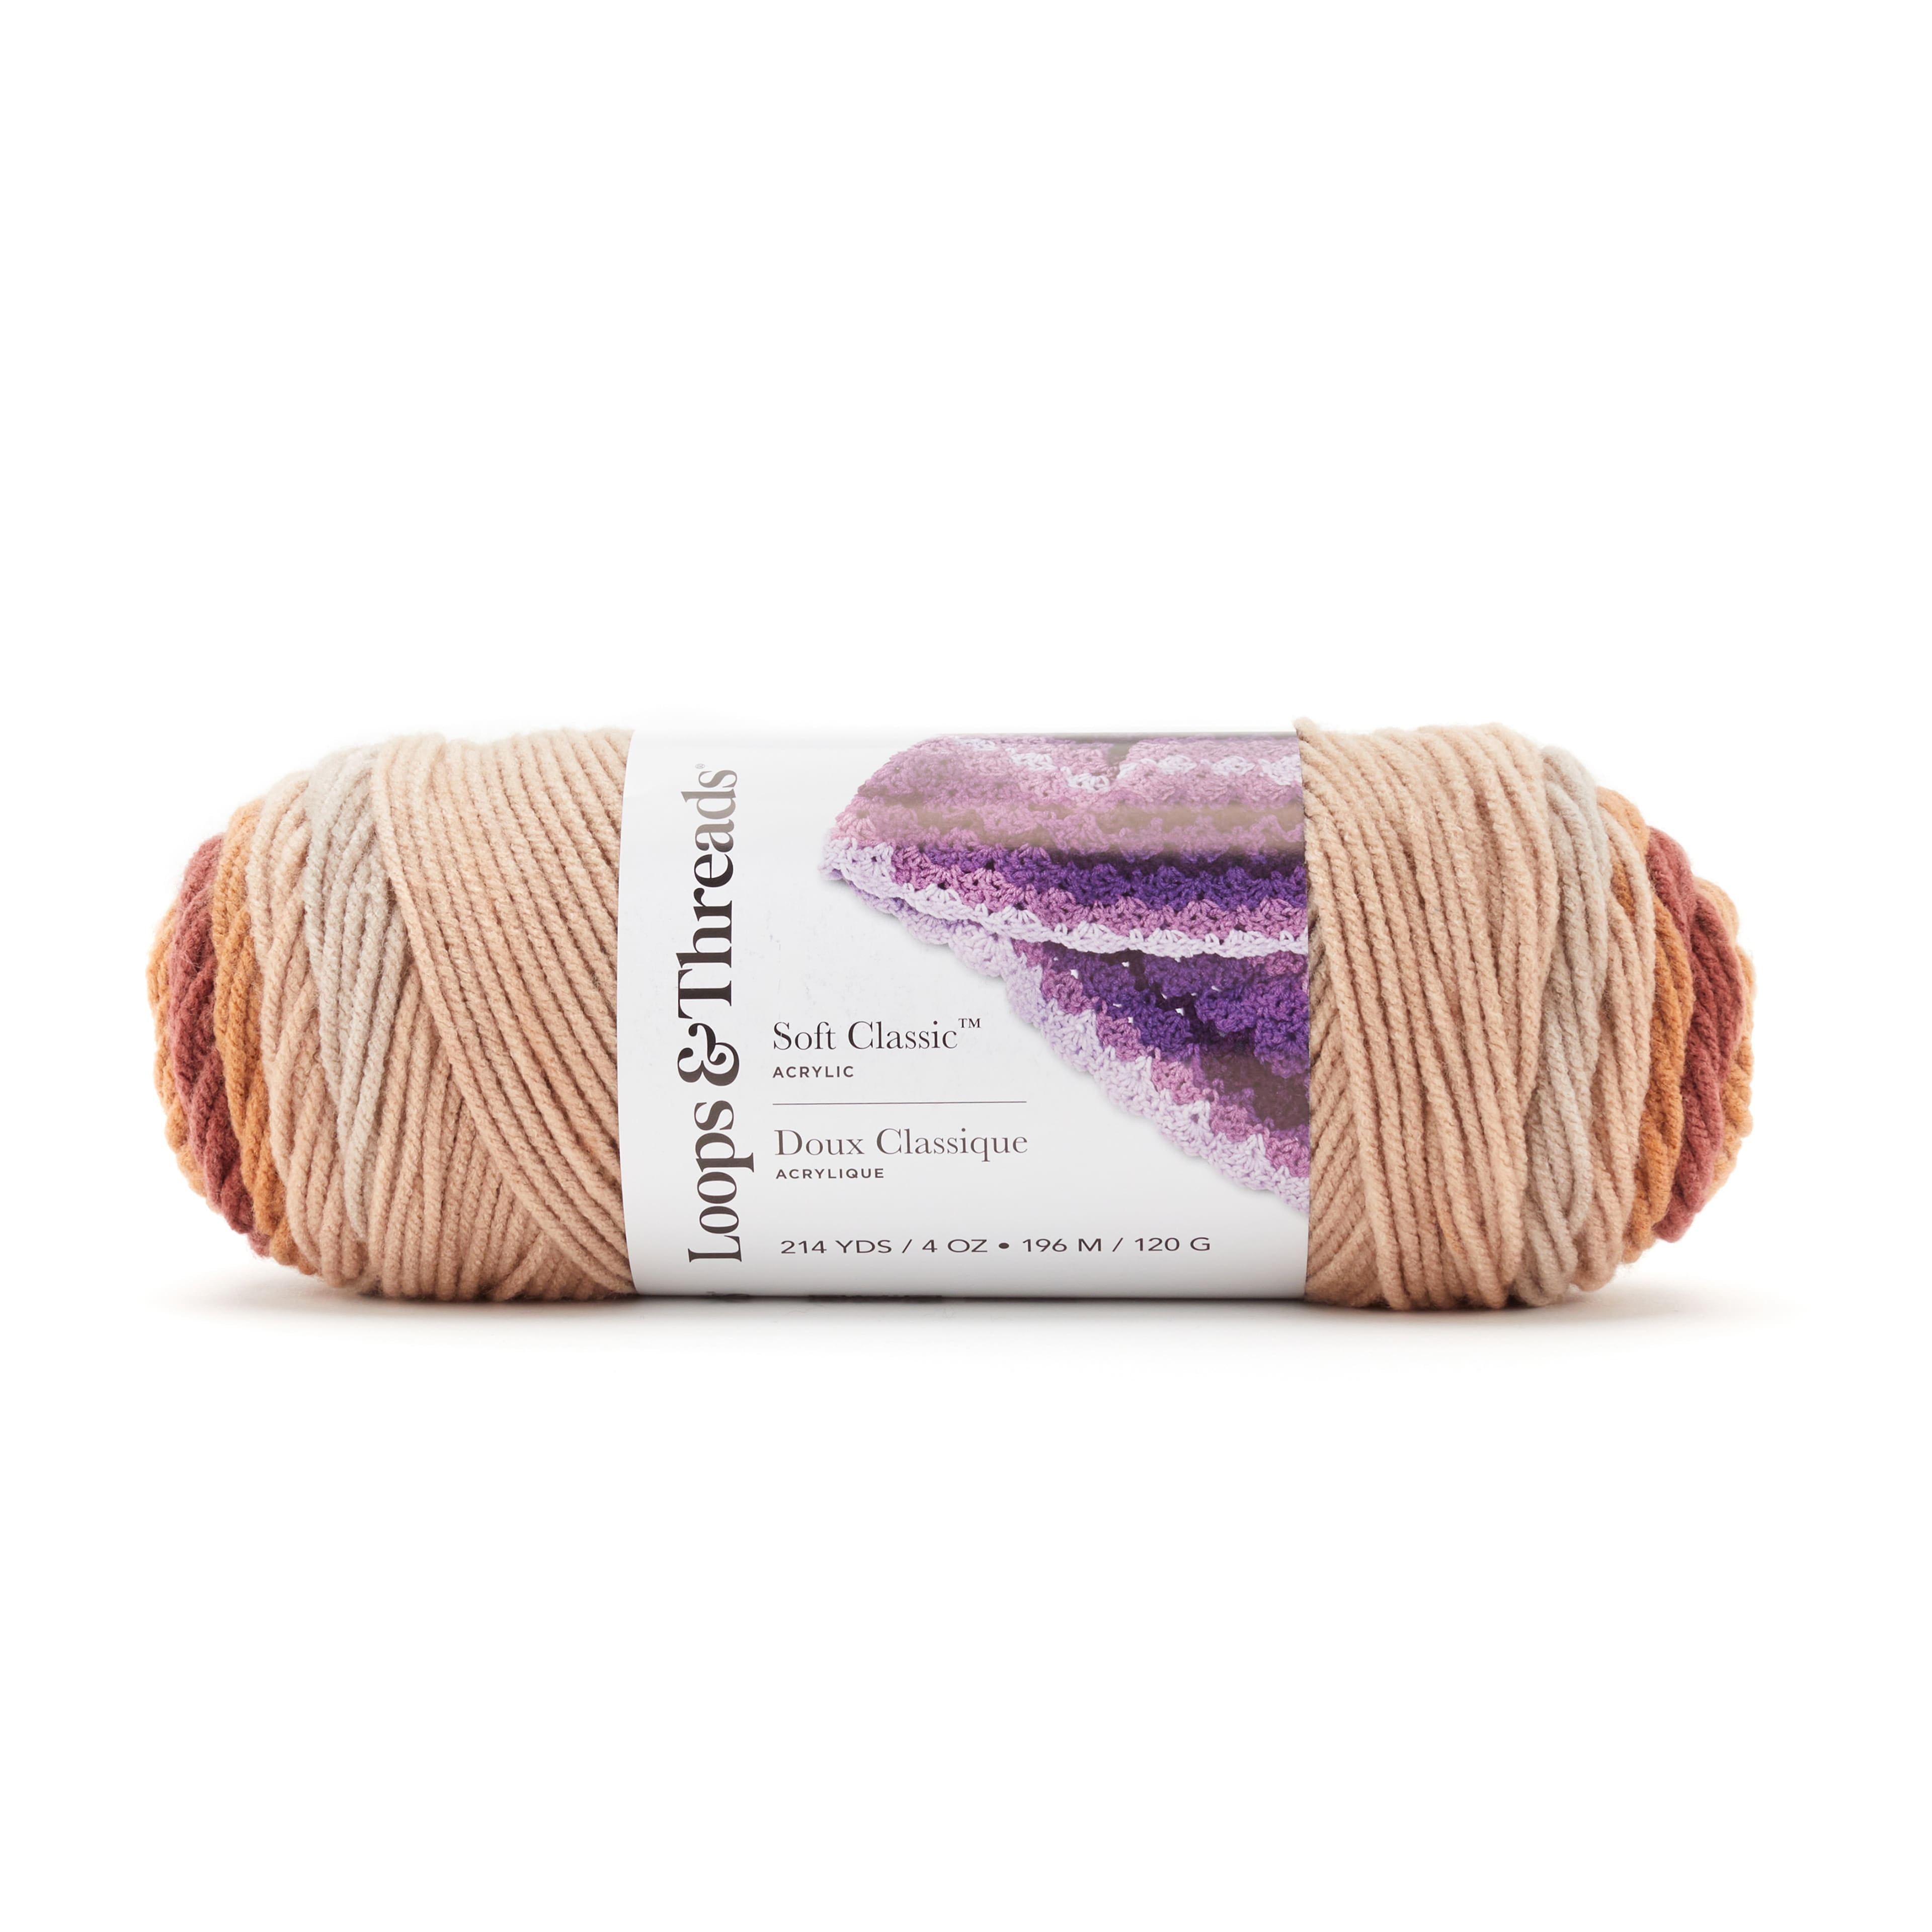 Ombre Hues™ Yarn by Loops & Threads®